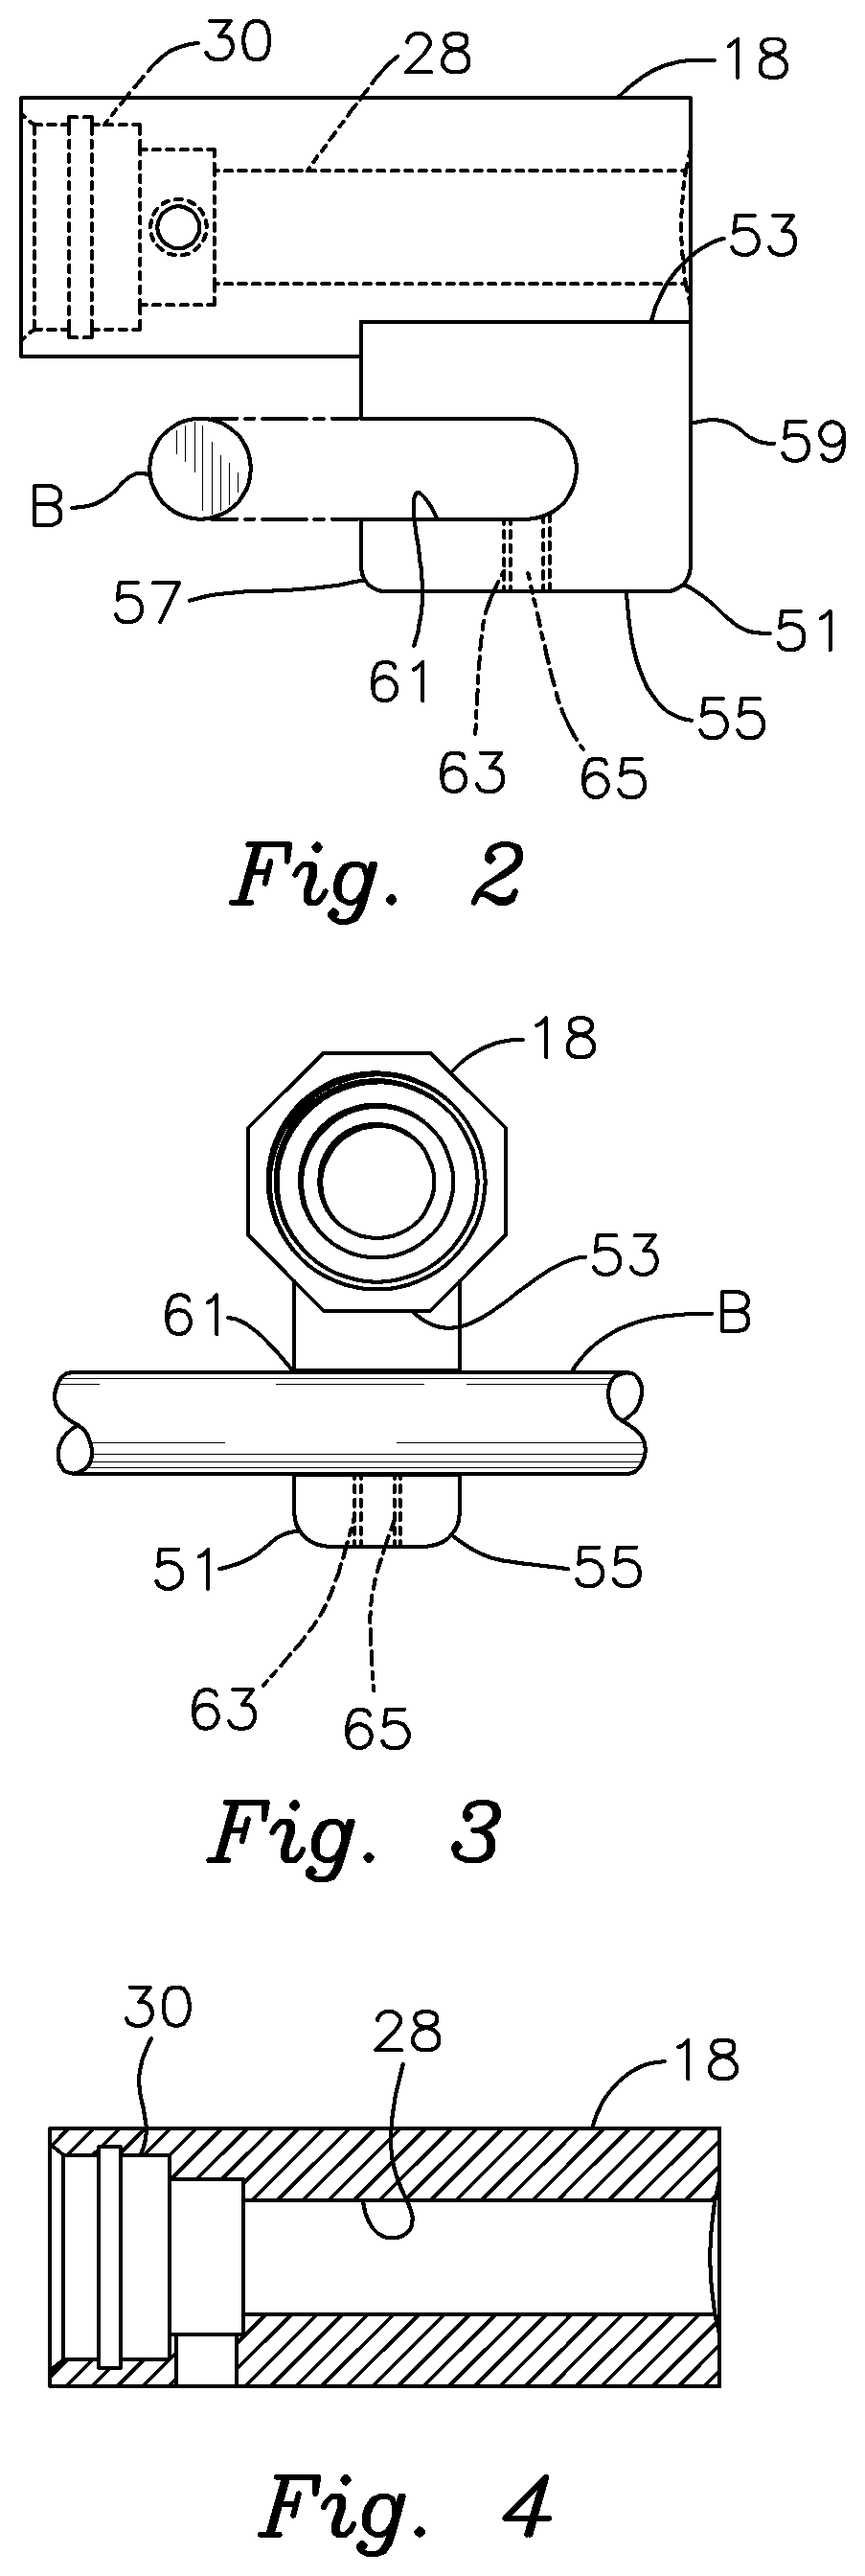 Mounting clamp for an illuminated surgical retractor system